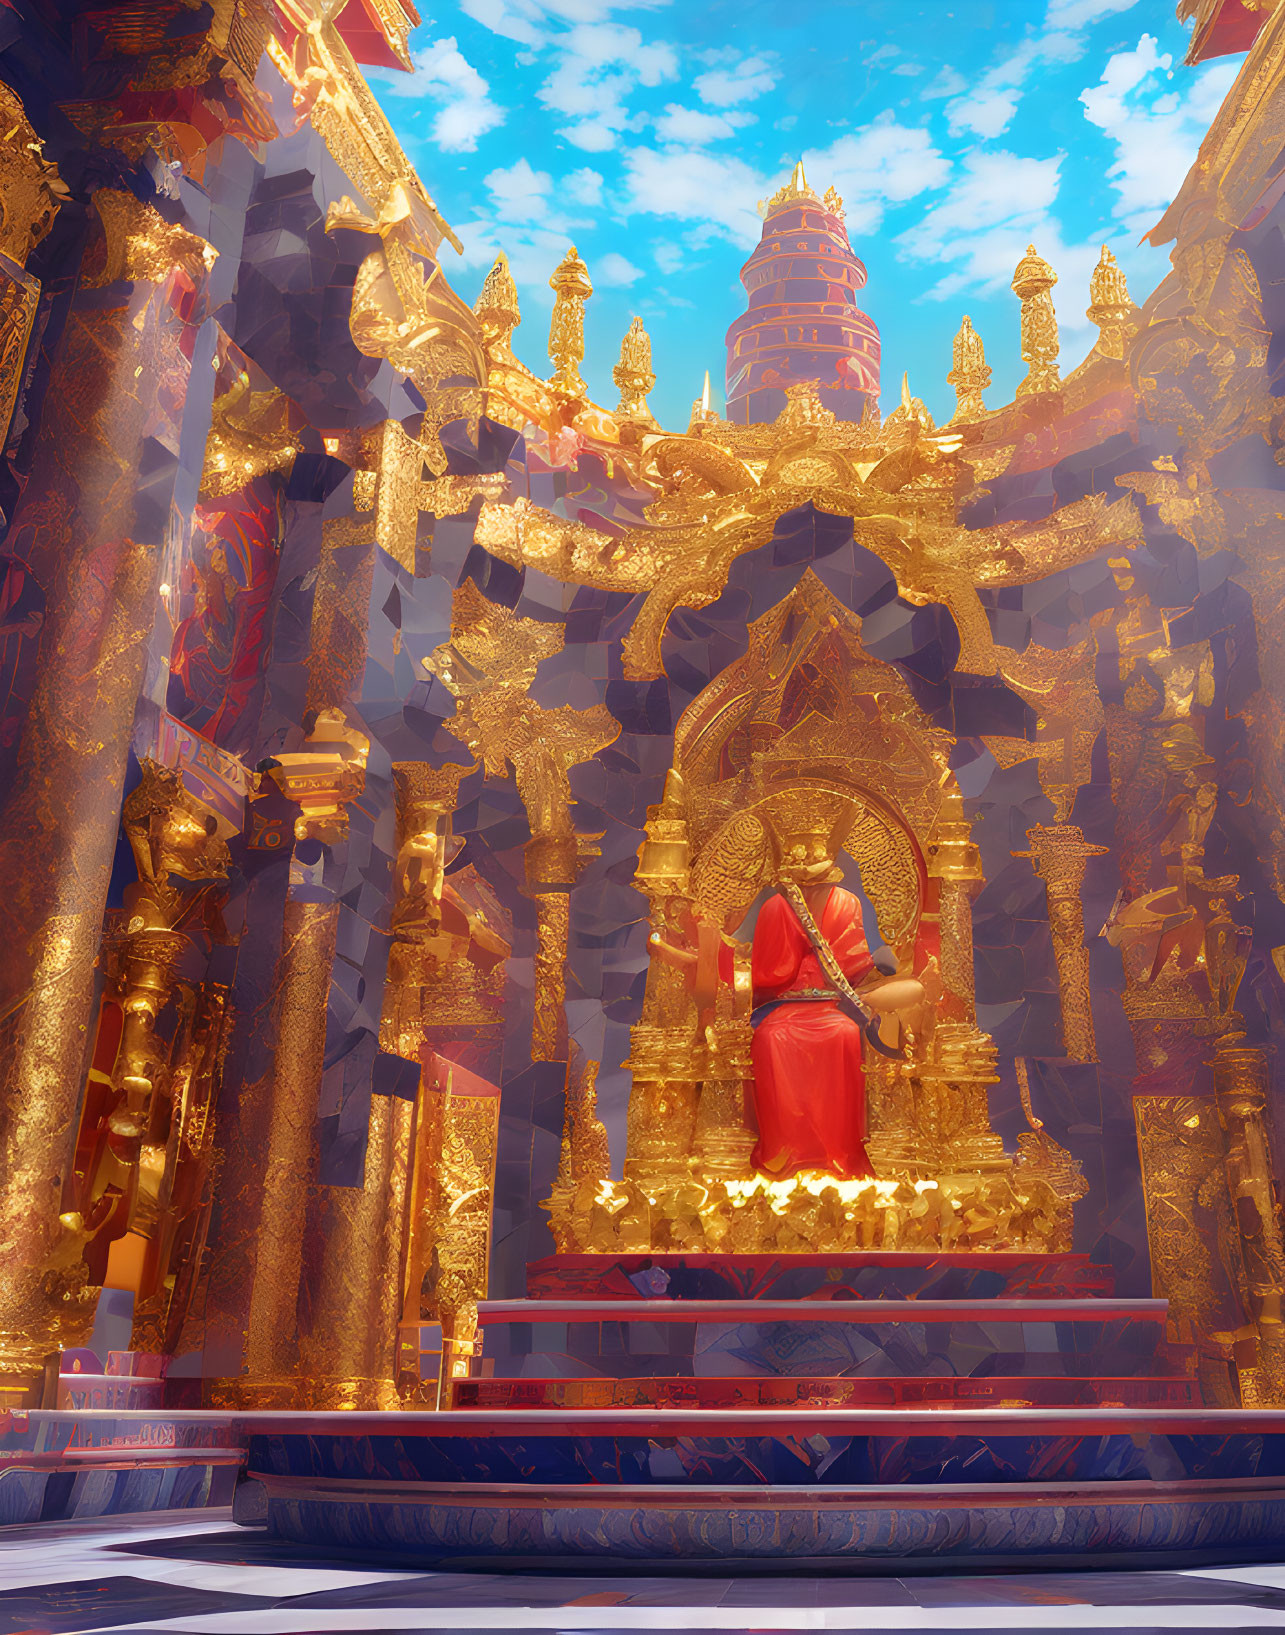 Golden Temple with Intricate Designs and Serene Figure in Red Robes